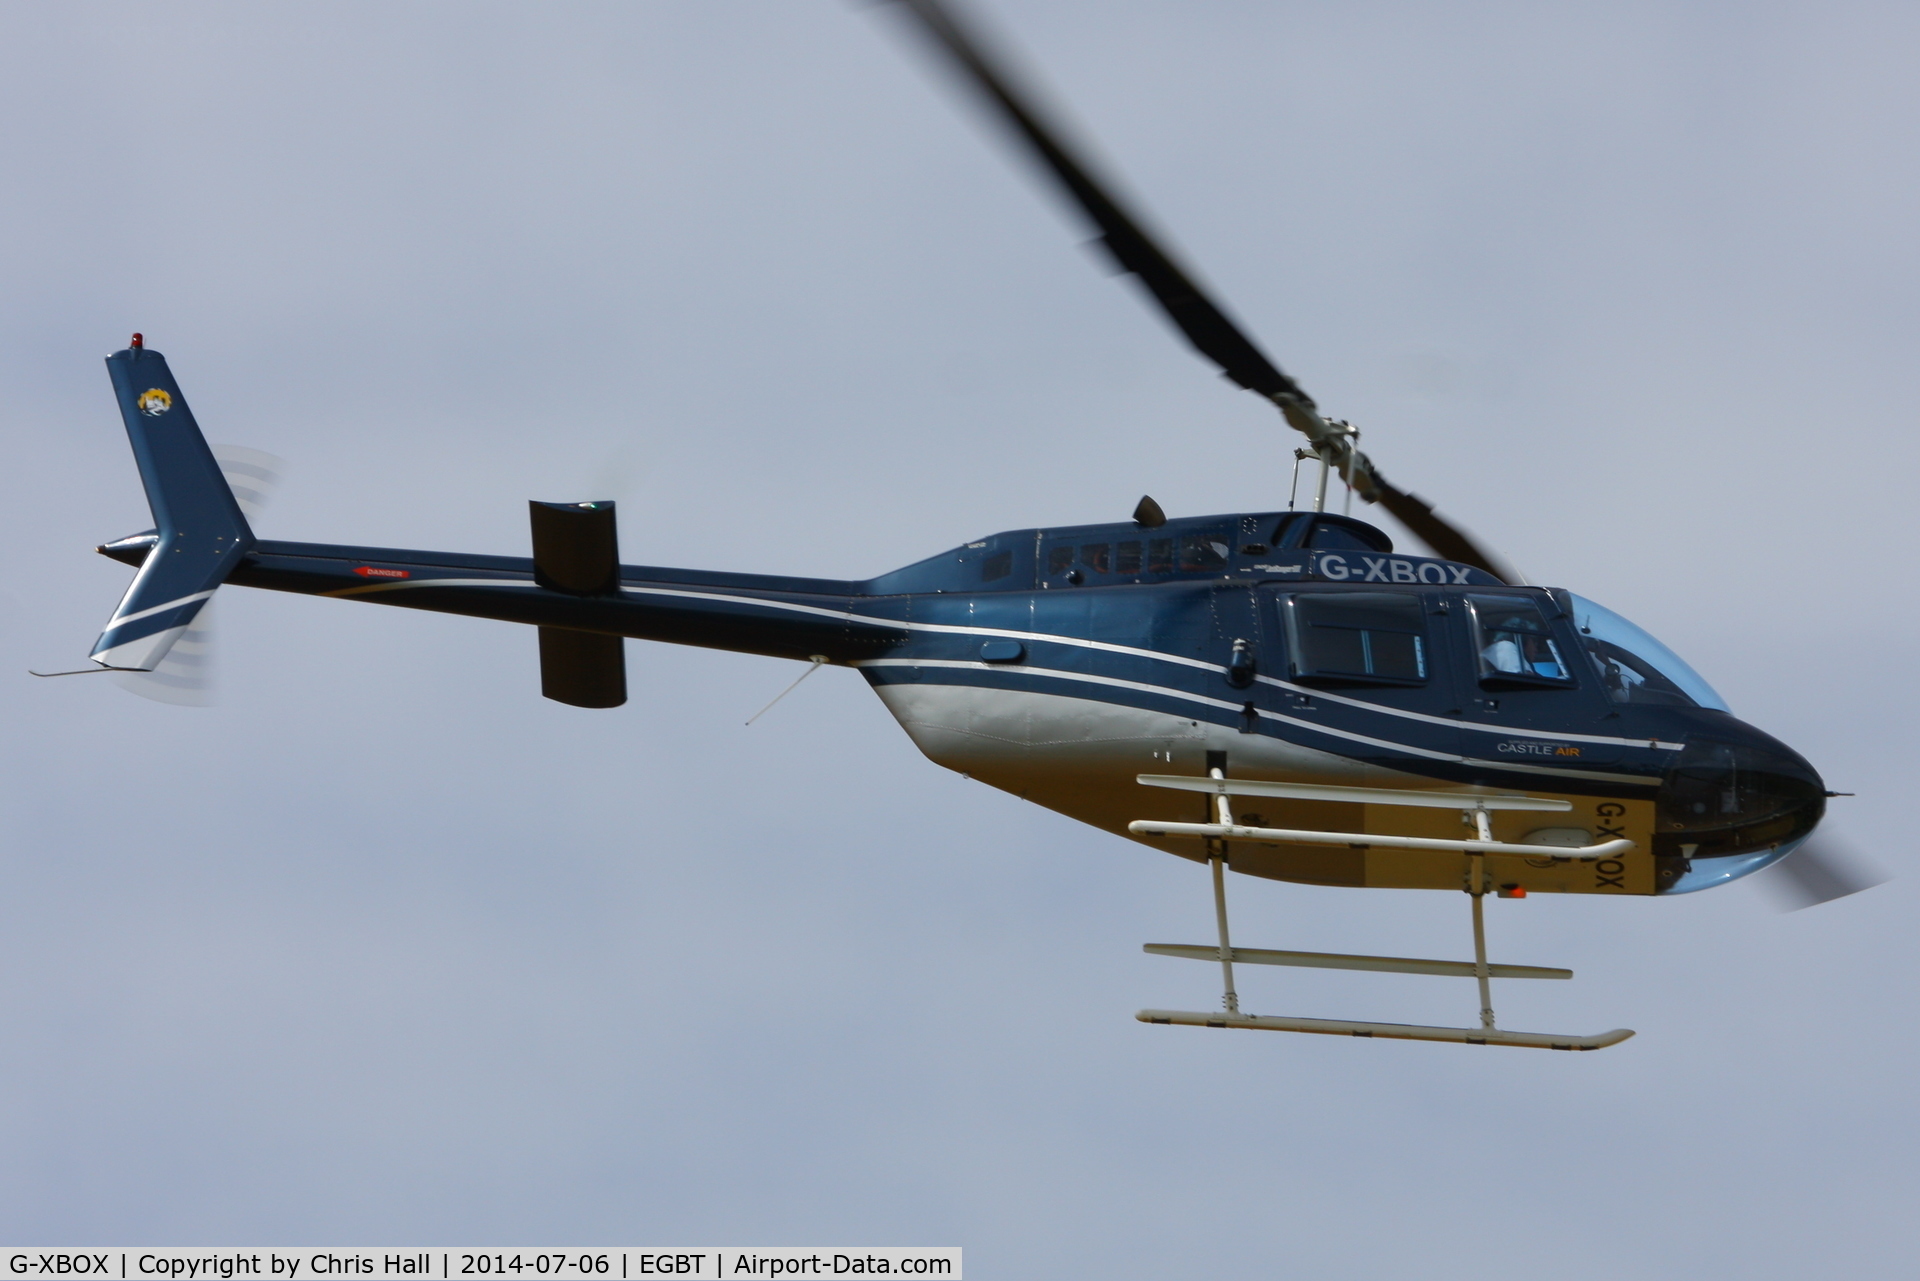 G-XBOX, 1981 Bell 206B JetRanger III C/N 3370, ferrying race fans to the British F1 Grand Prix at Silverstone